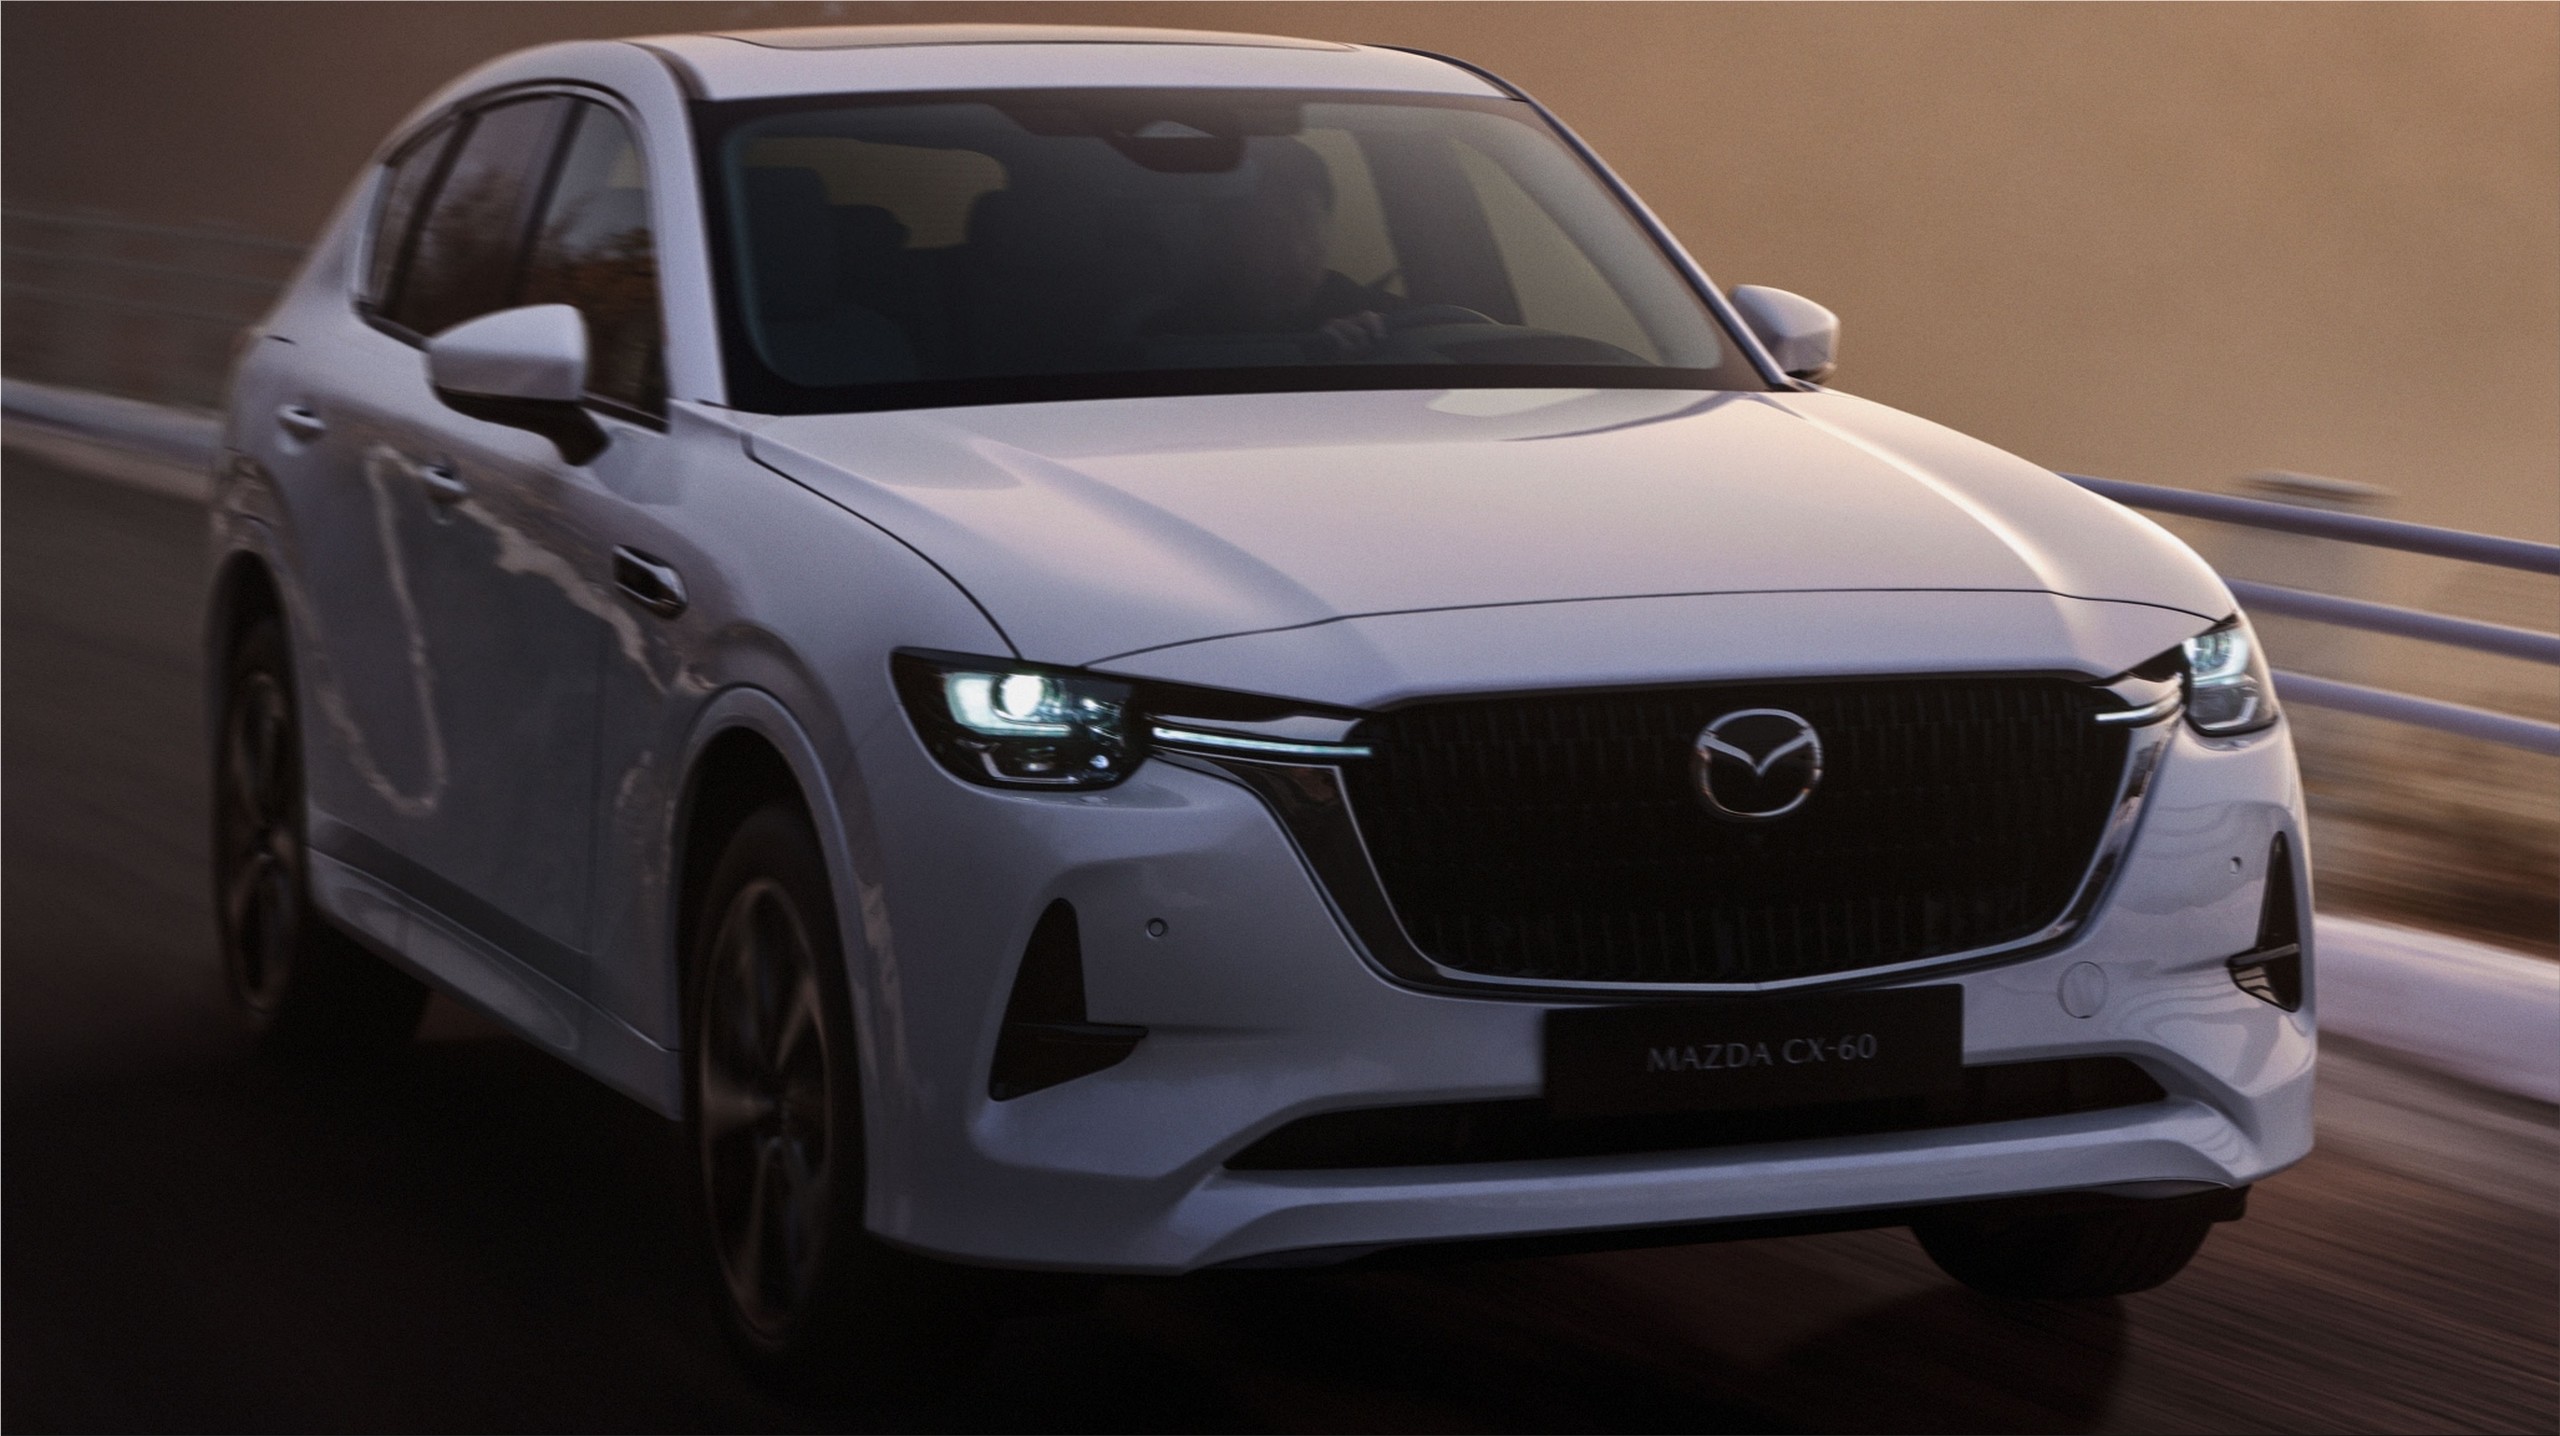 The new Mazda CX-60 Plug-in Hybrid SUV arrives this summer